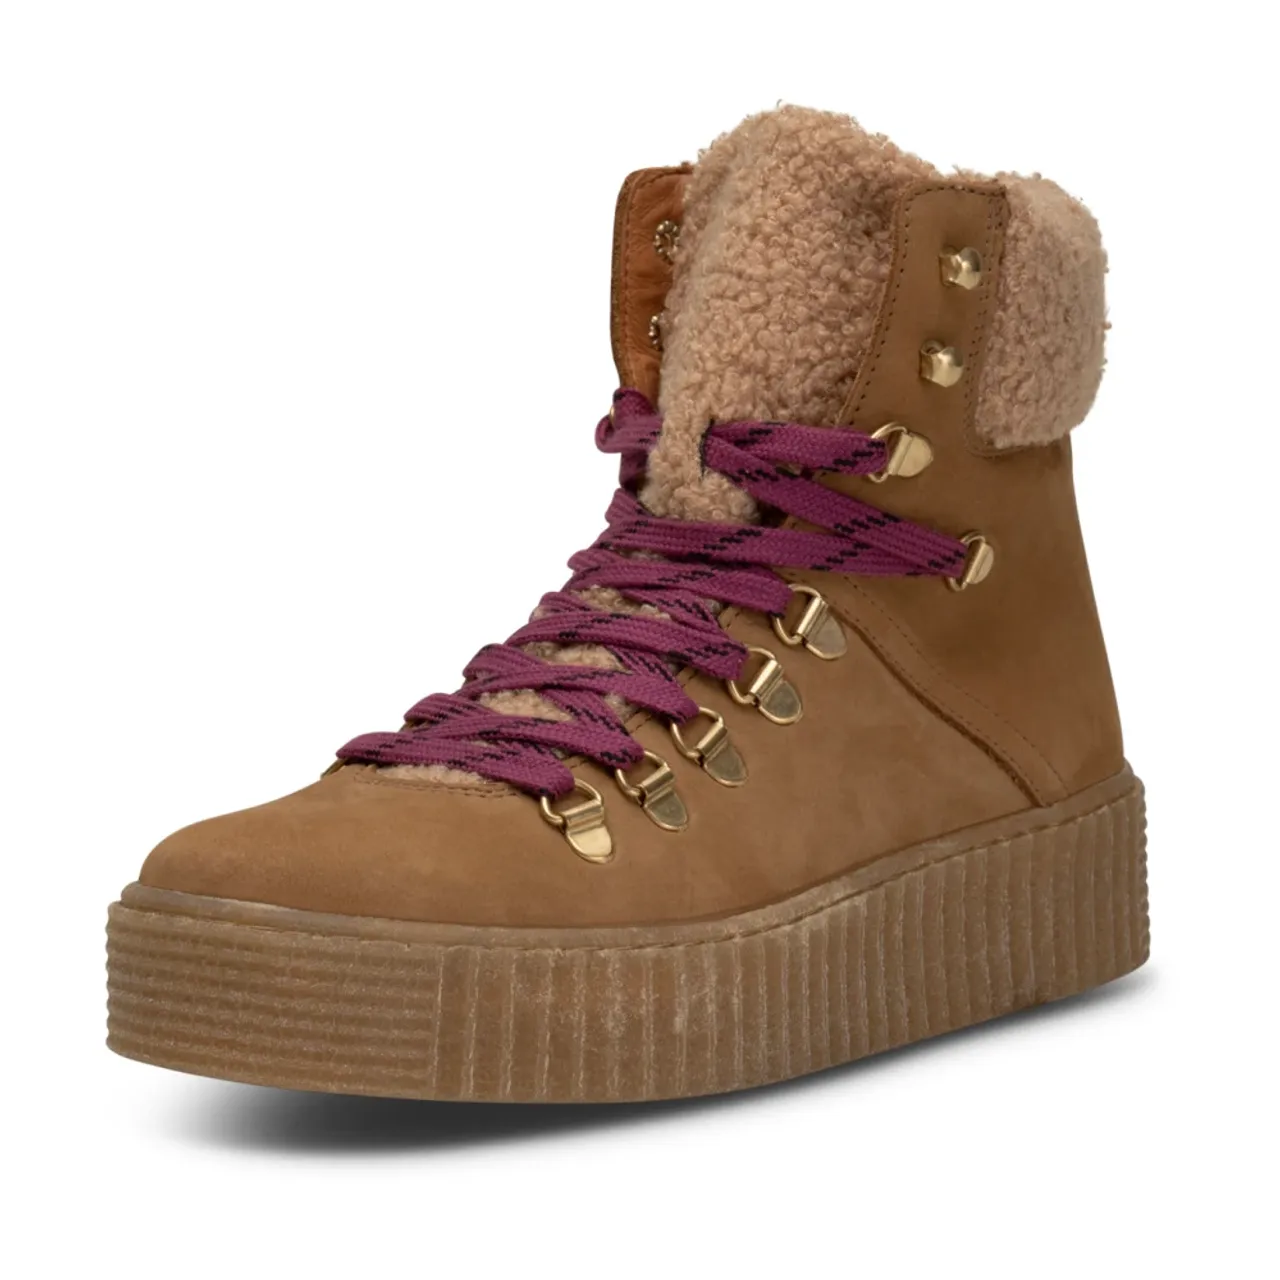 Shoe the Bear , Agda Nubuck Leather Boot - Camel ,Brown female, Sizes: